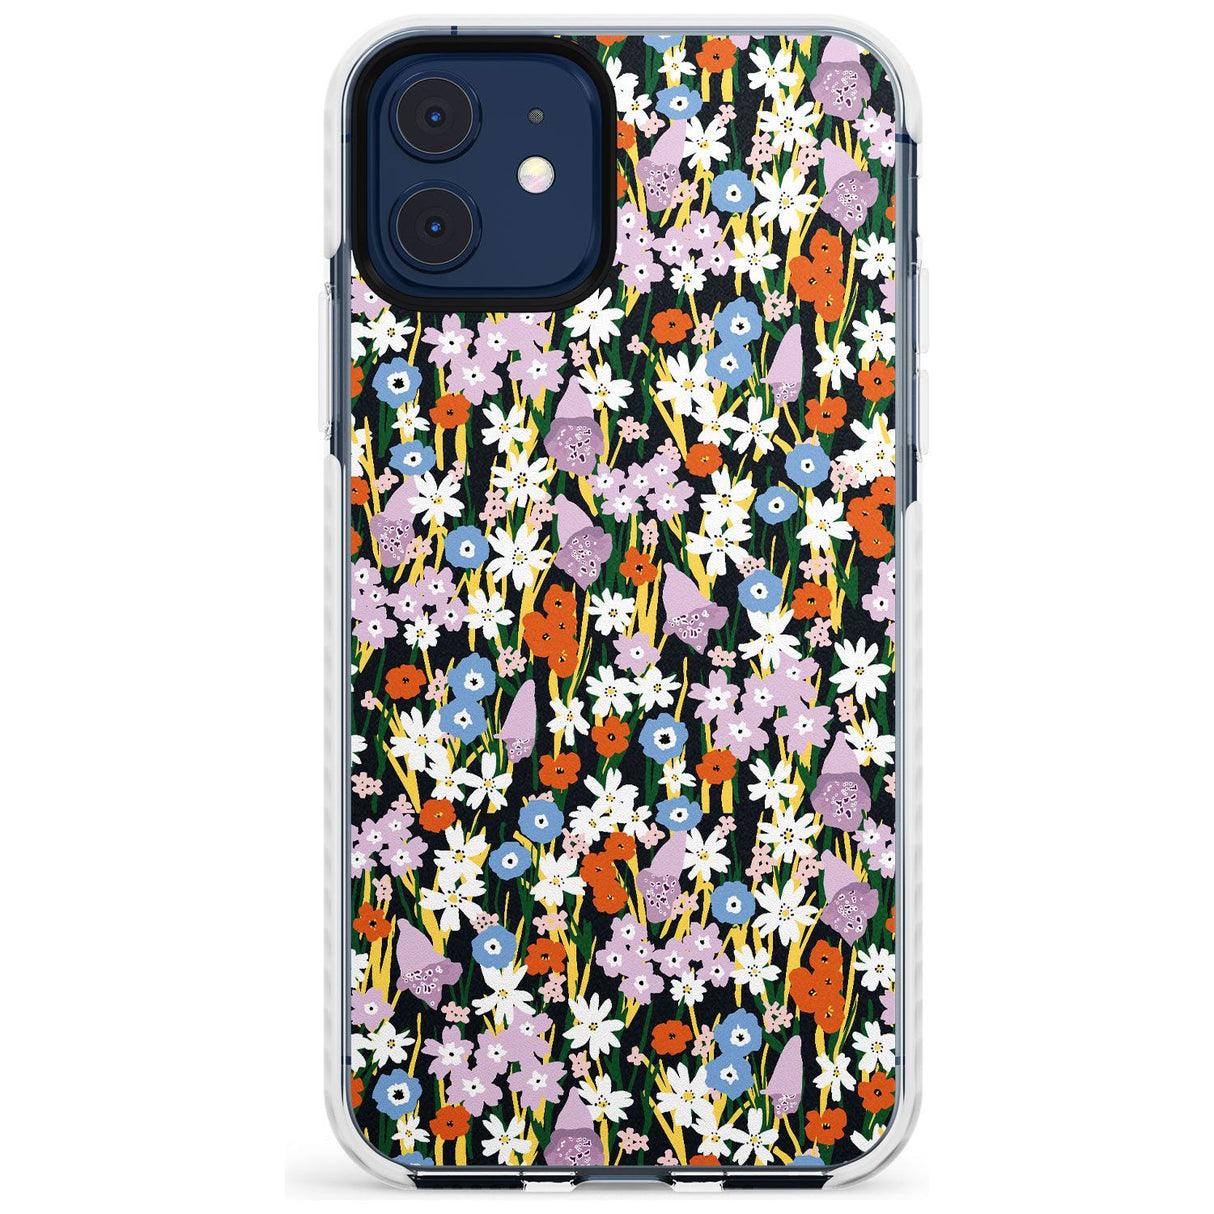 Energetic Floral Mix: Solid Slim TPU Phone Case for iPhone 11